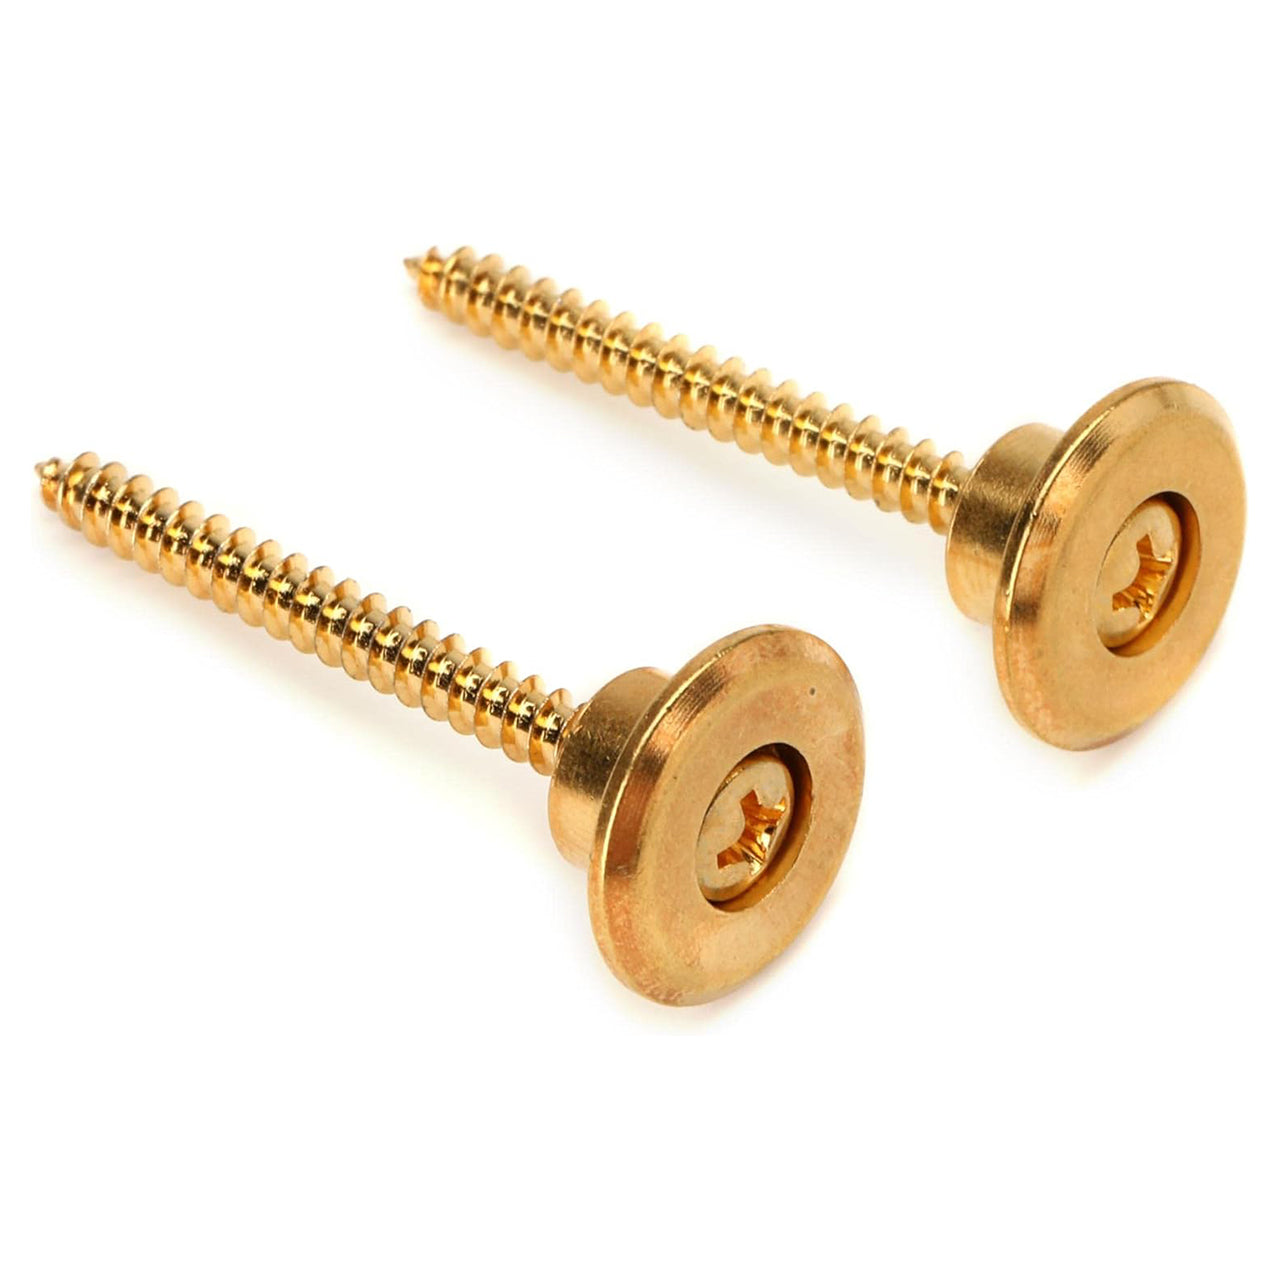 Paul Reed Smith Strap Button & Screws Set, Gold